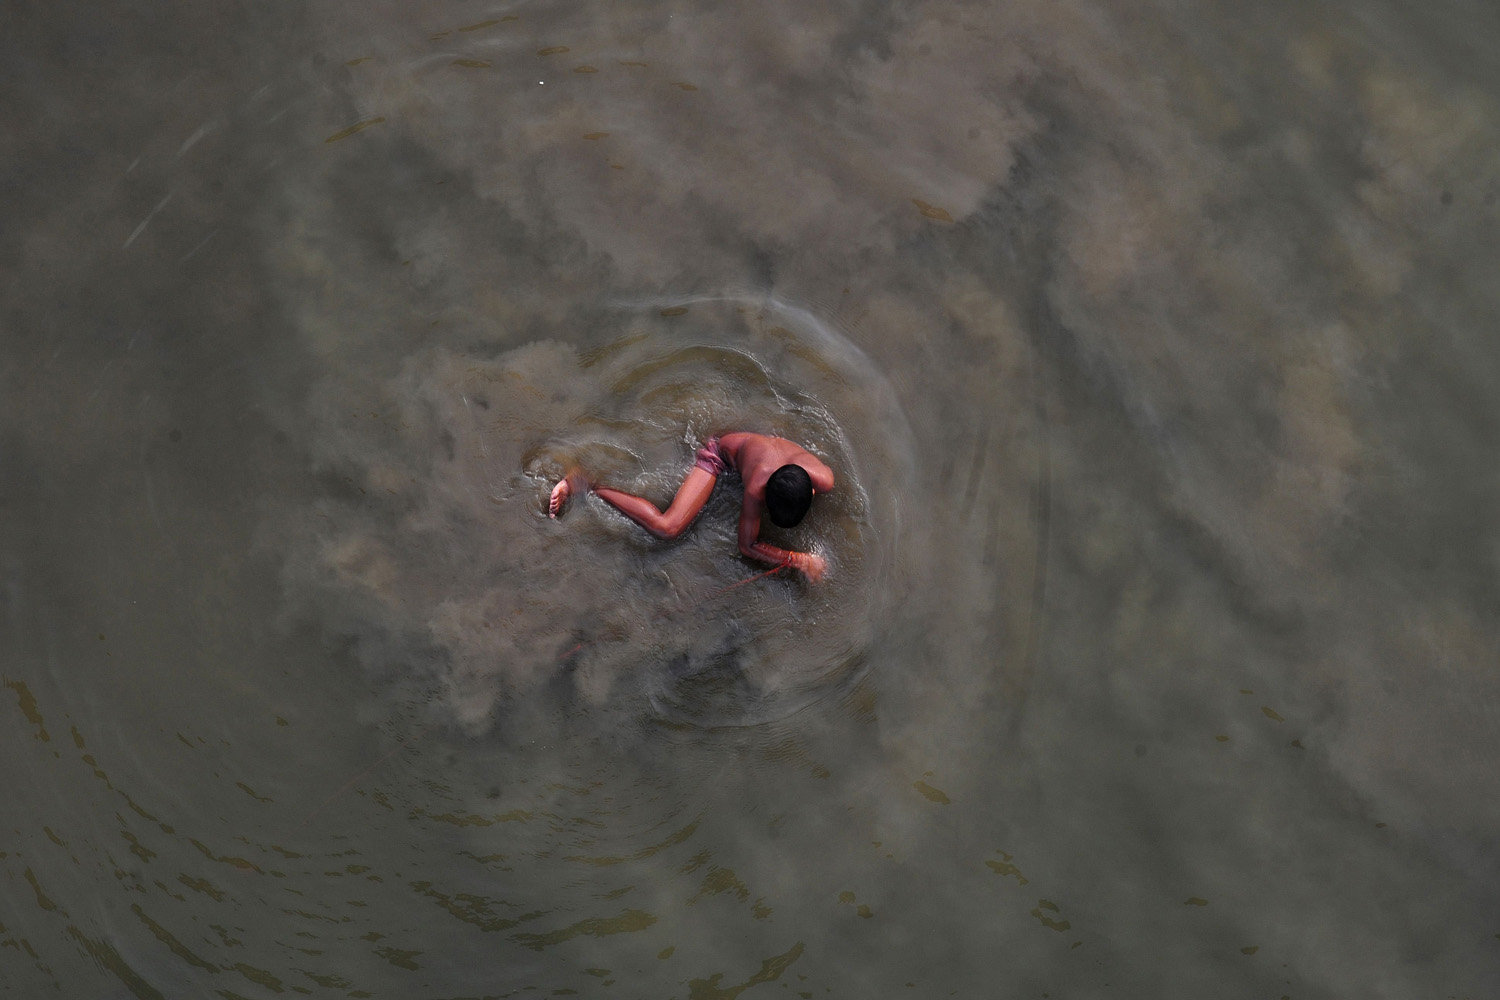 Jun. 18, 2014. An Indian boy cools off with a swim in the Yamuna river on a hot summer day in Allahabad.